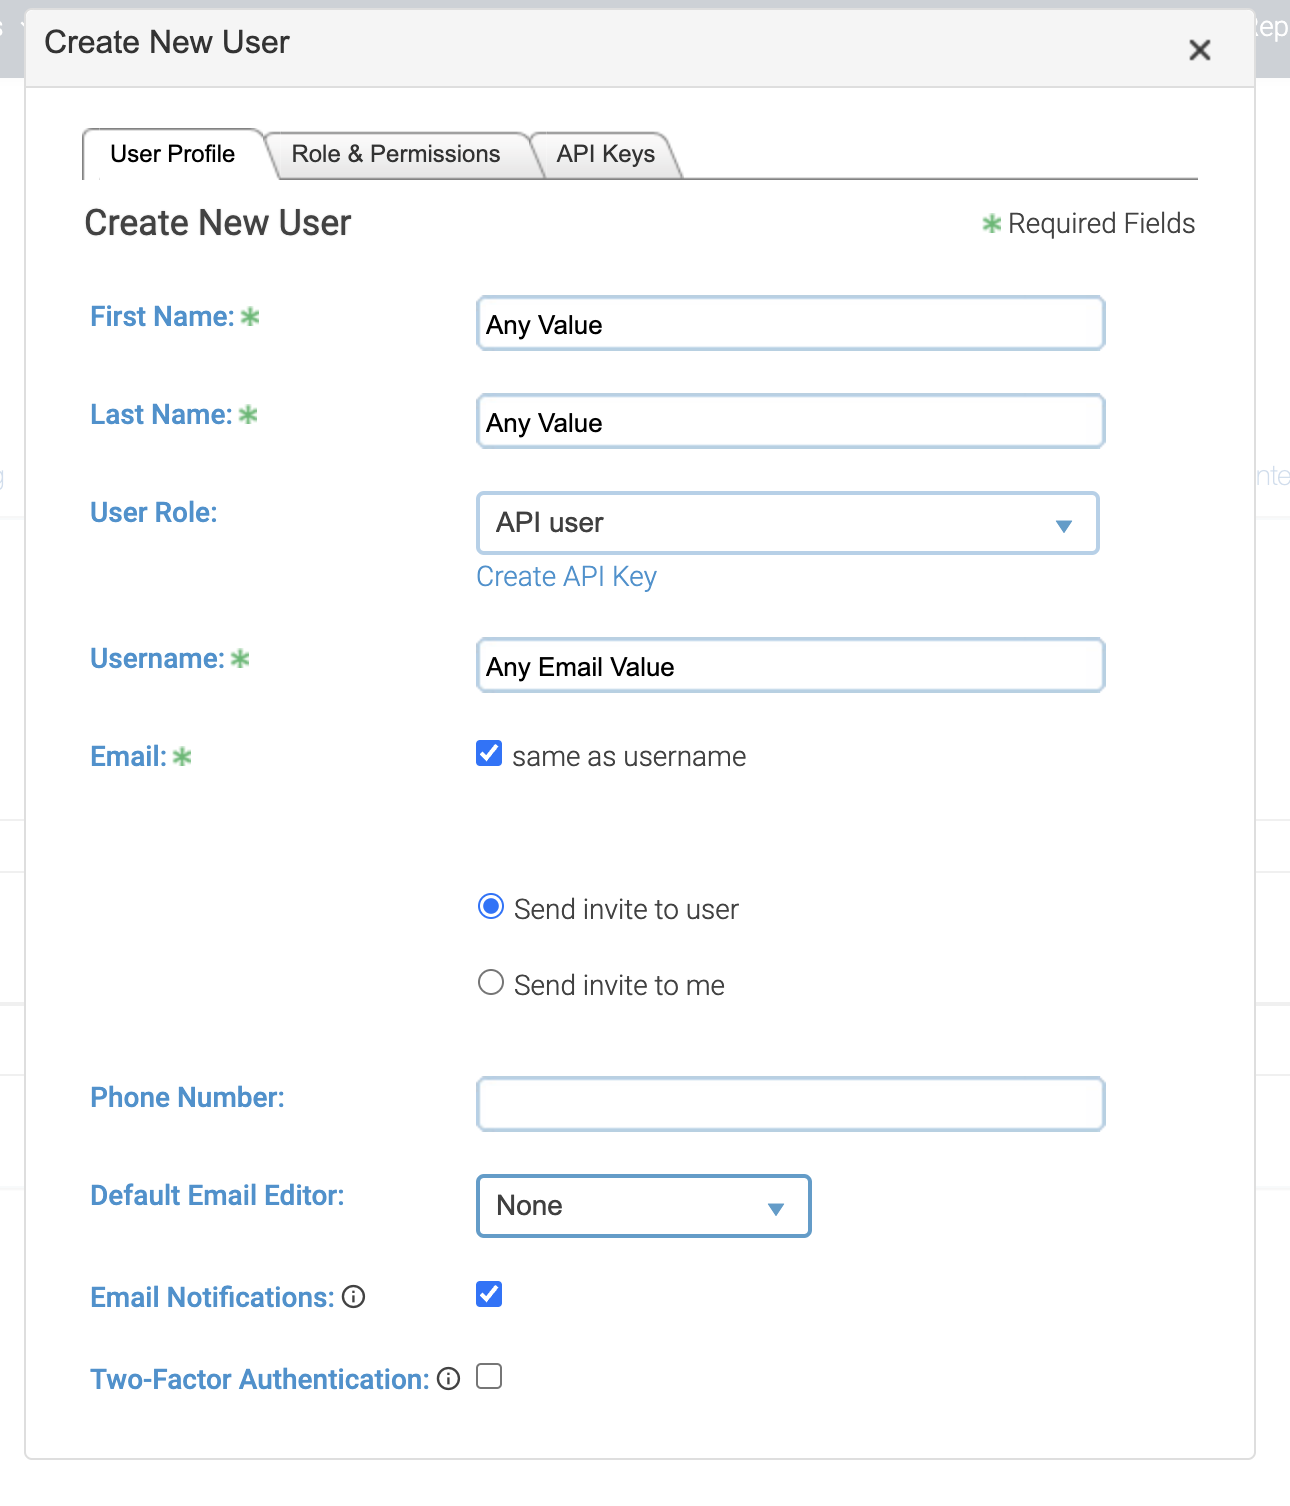 Fill out User Information and select role